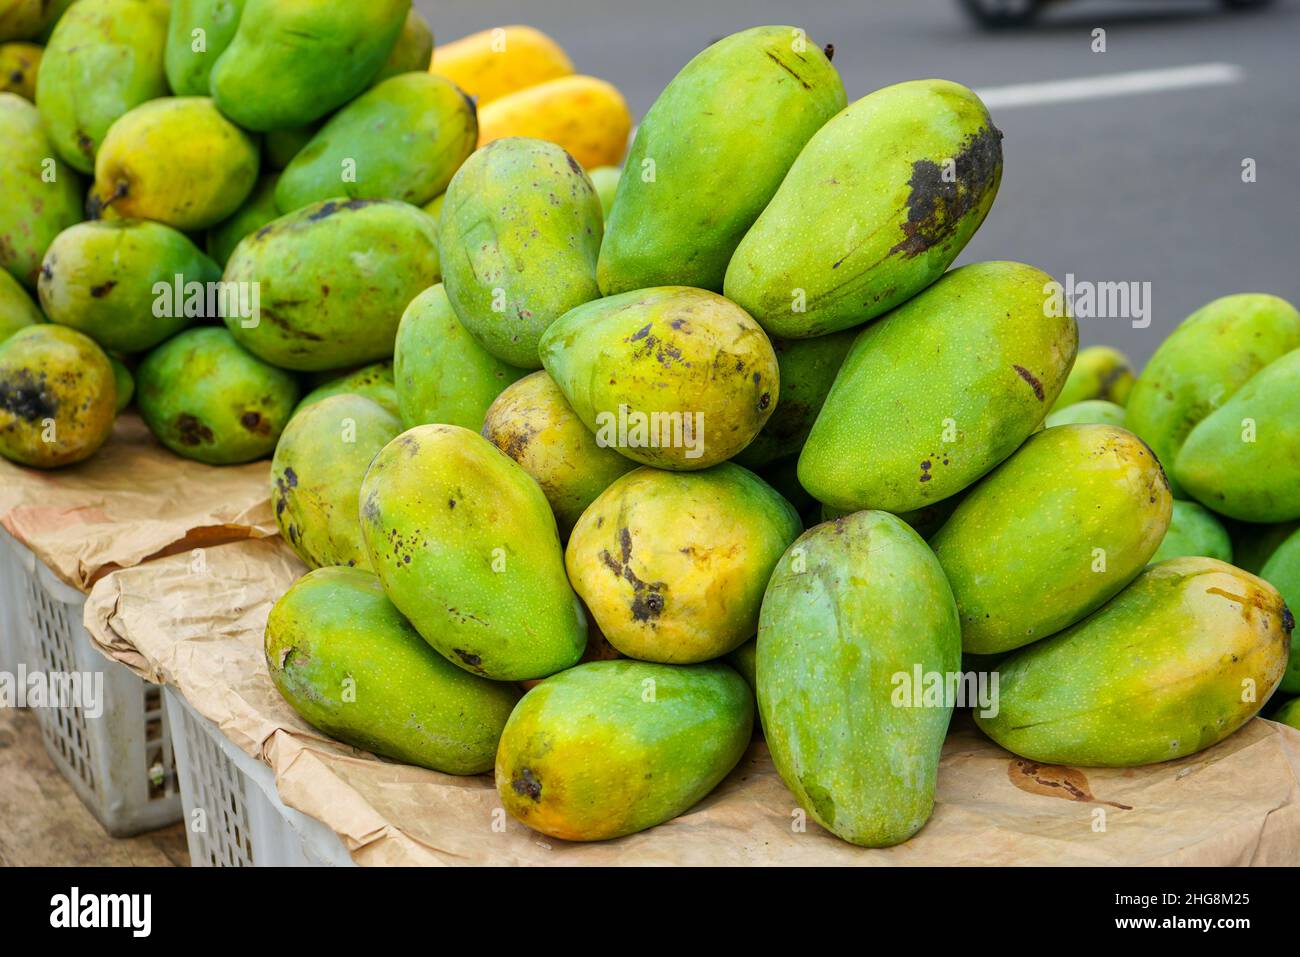 Mangifera indica, commonly known as mango is a species of flowering plant in the sumac and poison ivy family Anacardiaceae. Mangifera laurina. Stock Photo